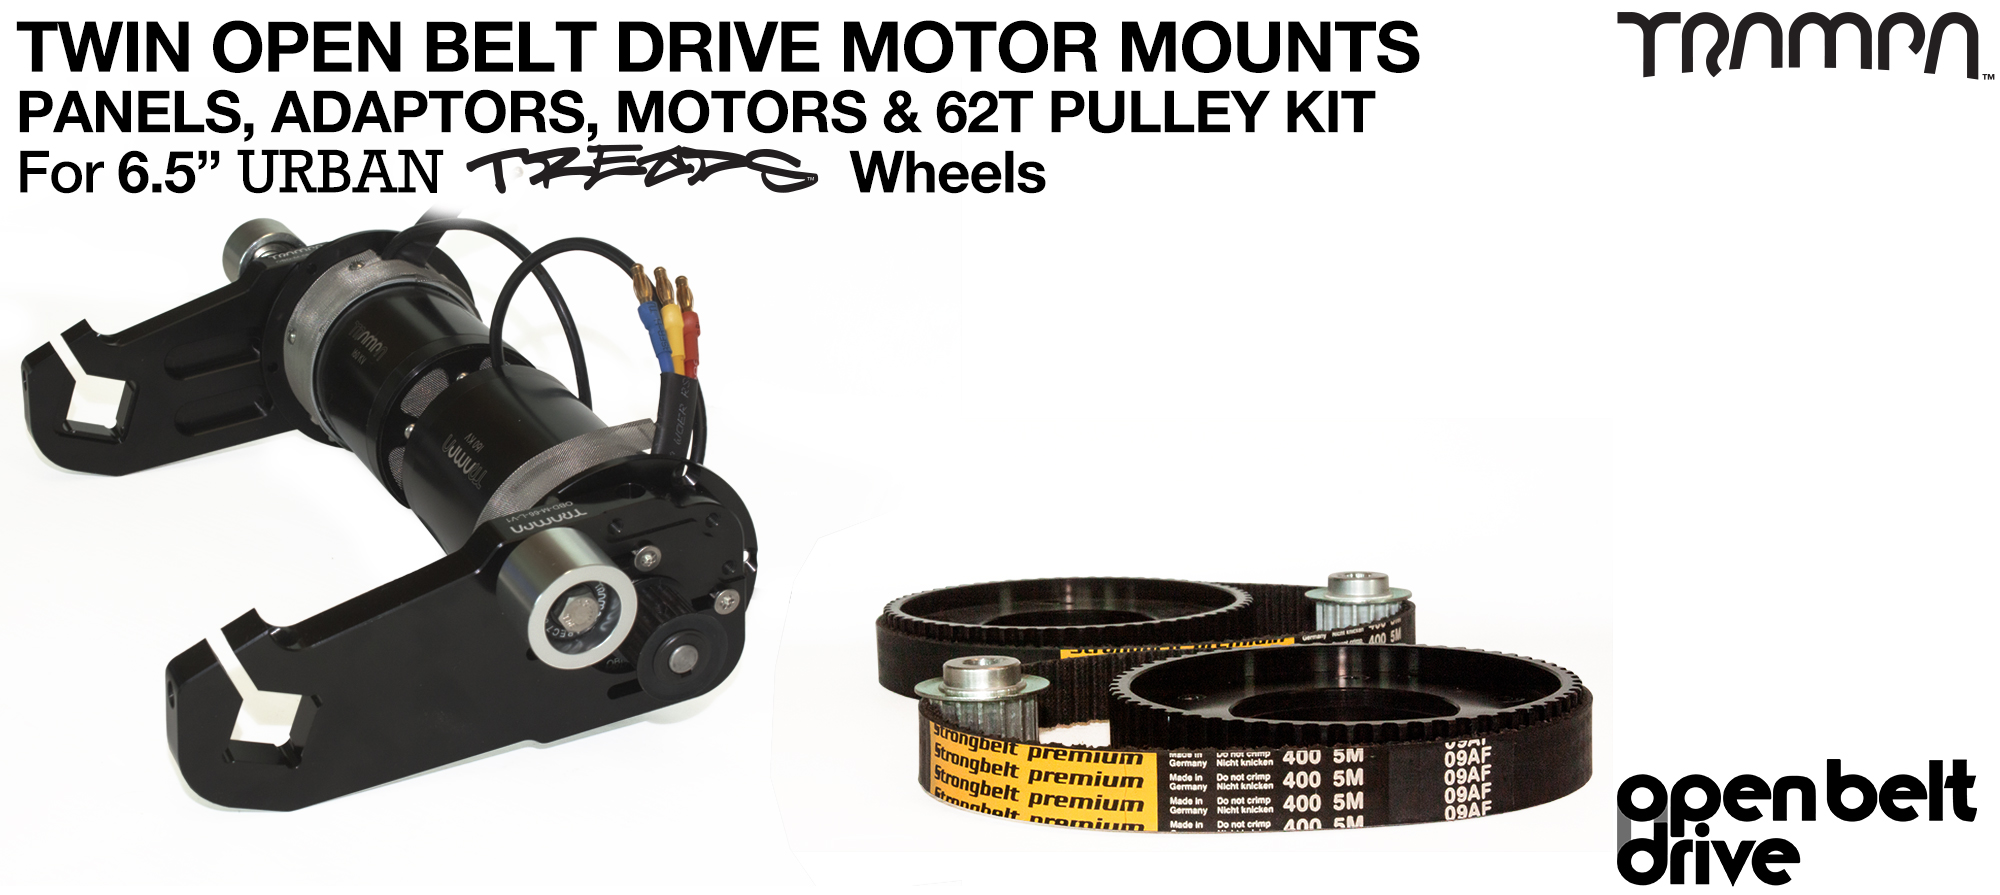 66T OBD Motor Mount with 62T Pulley kit & custom Motor - TWIN